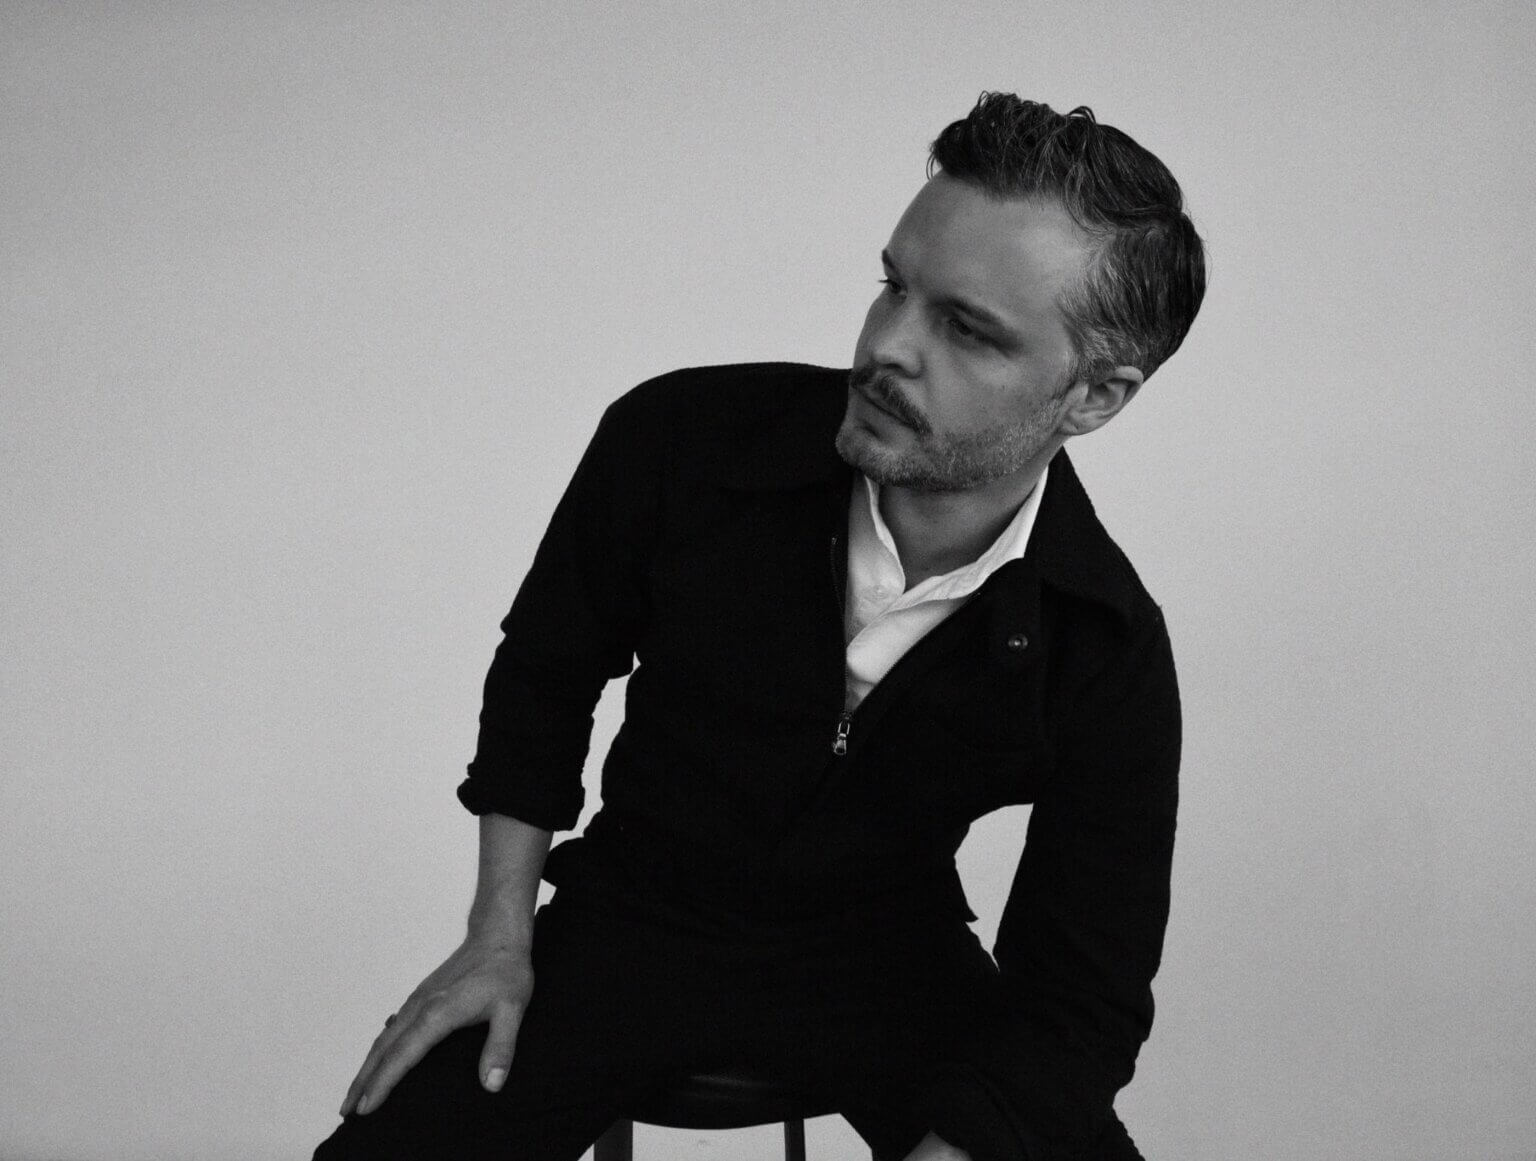 Kristian Matsson AKA: The Tallest Man On Earth, has announced Too Late For Edelweiss, an album of new covers out September 23rd on ANTI